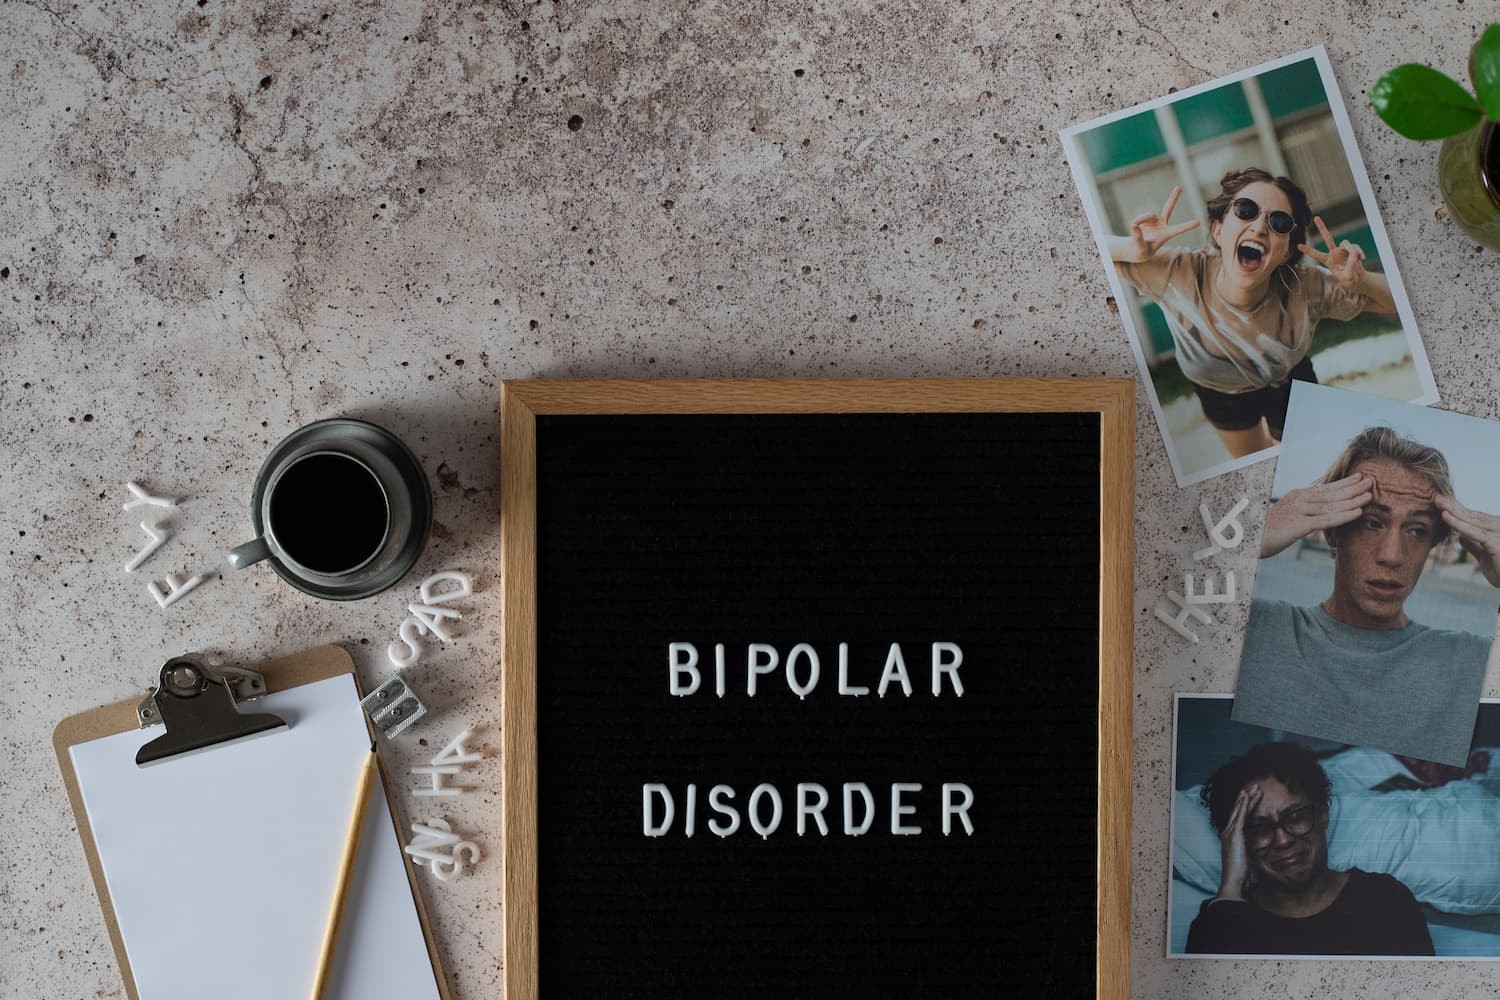 What Are Bipolar Disorders?